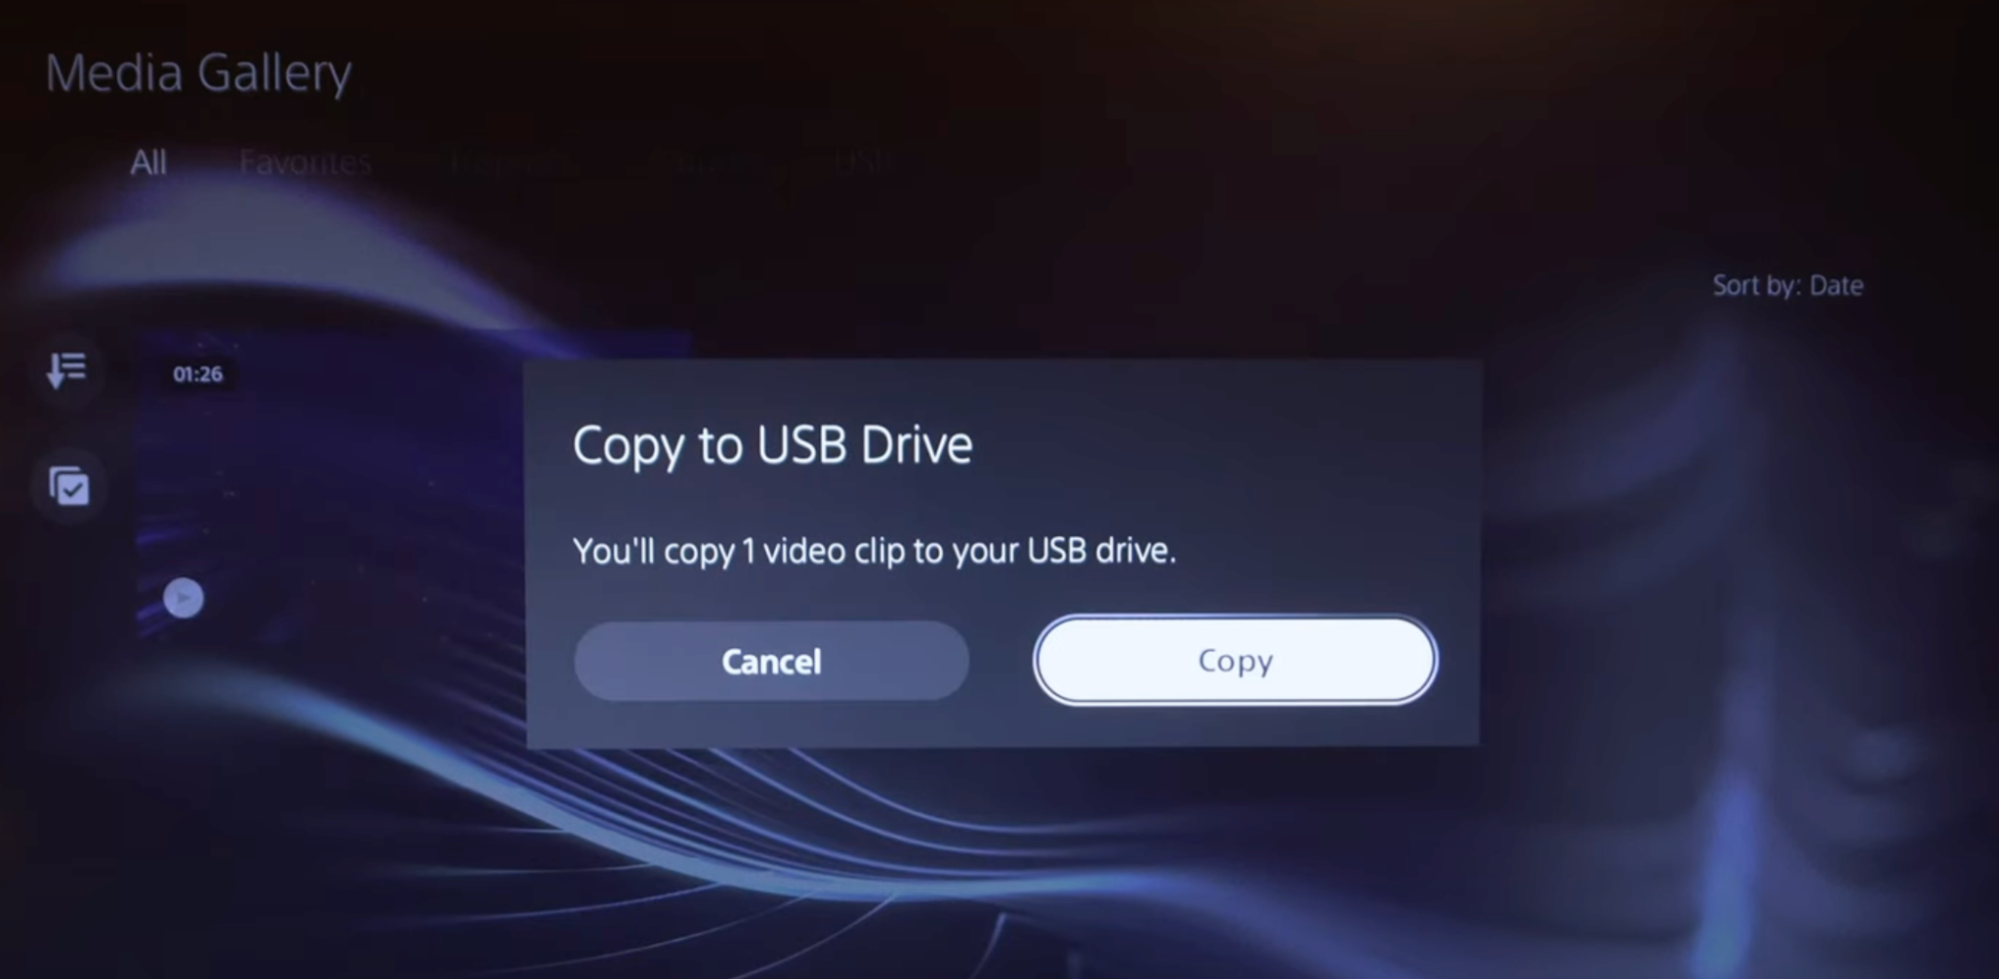 transfer to the USB device